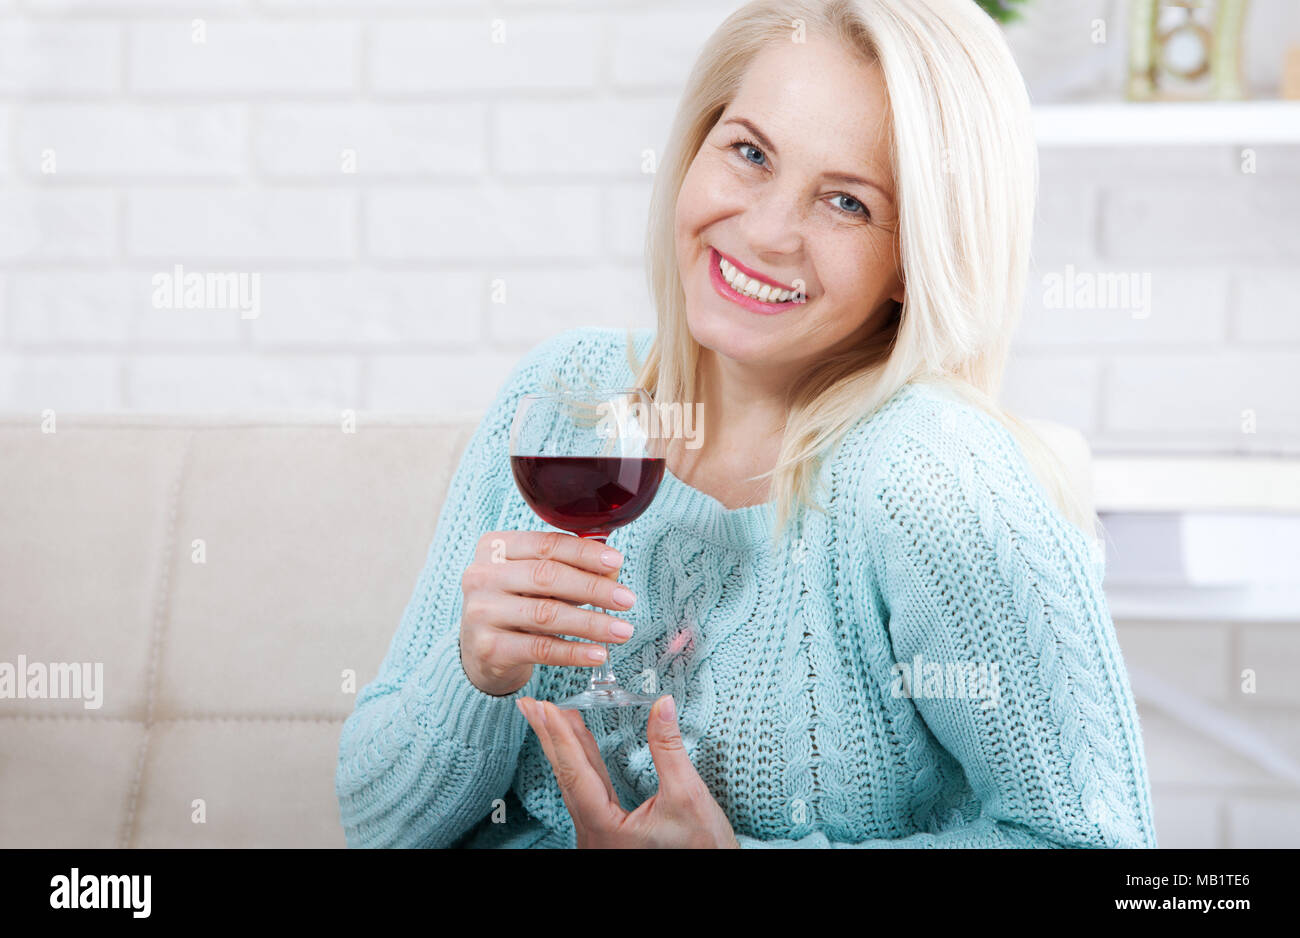 Happy blonde drinking red wine with eyes closed. Stock Photo